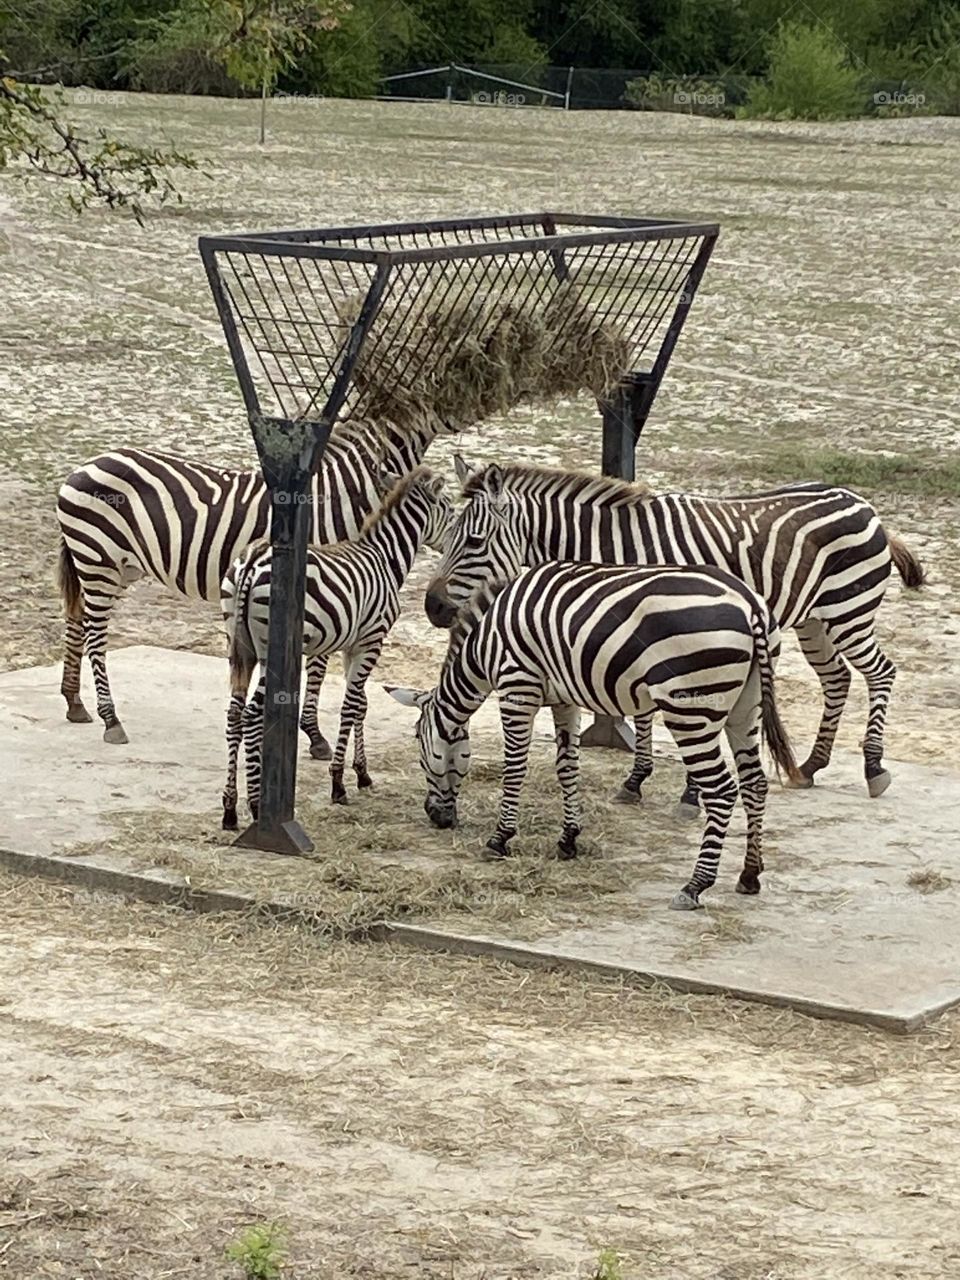 Zebras feeding in their enclosure at the Cape May County Park & Zoo in Cape May, NJ